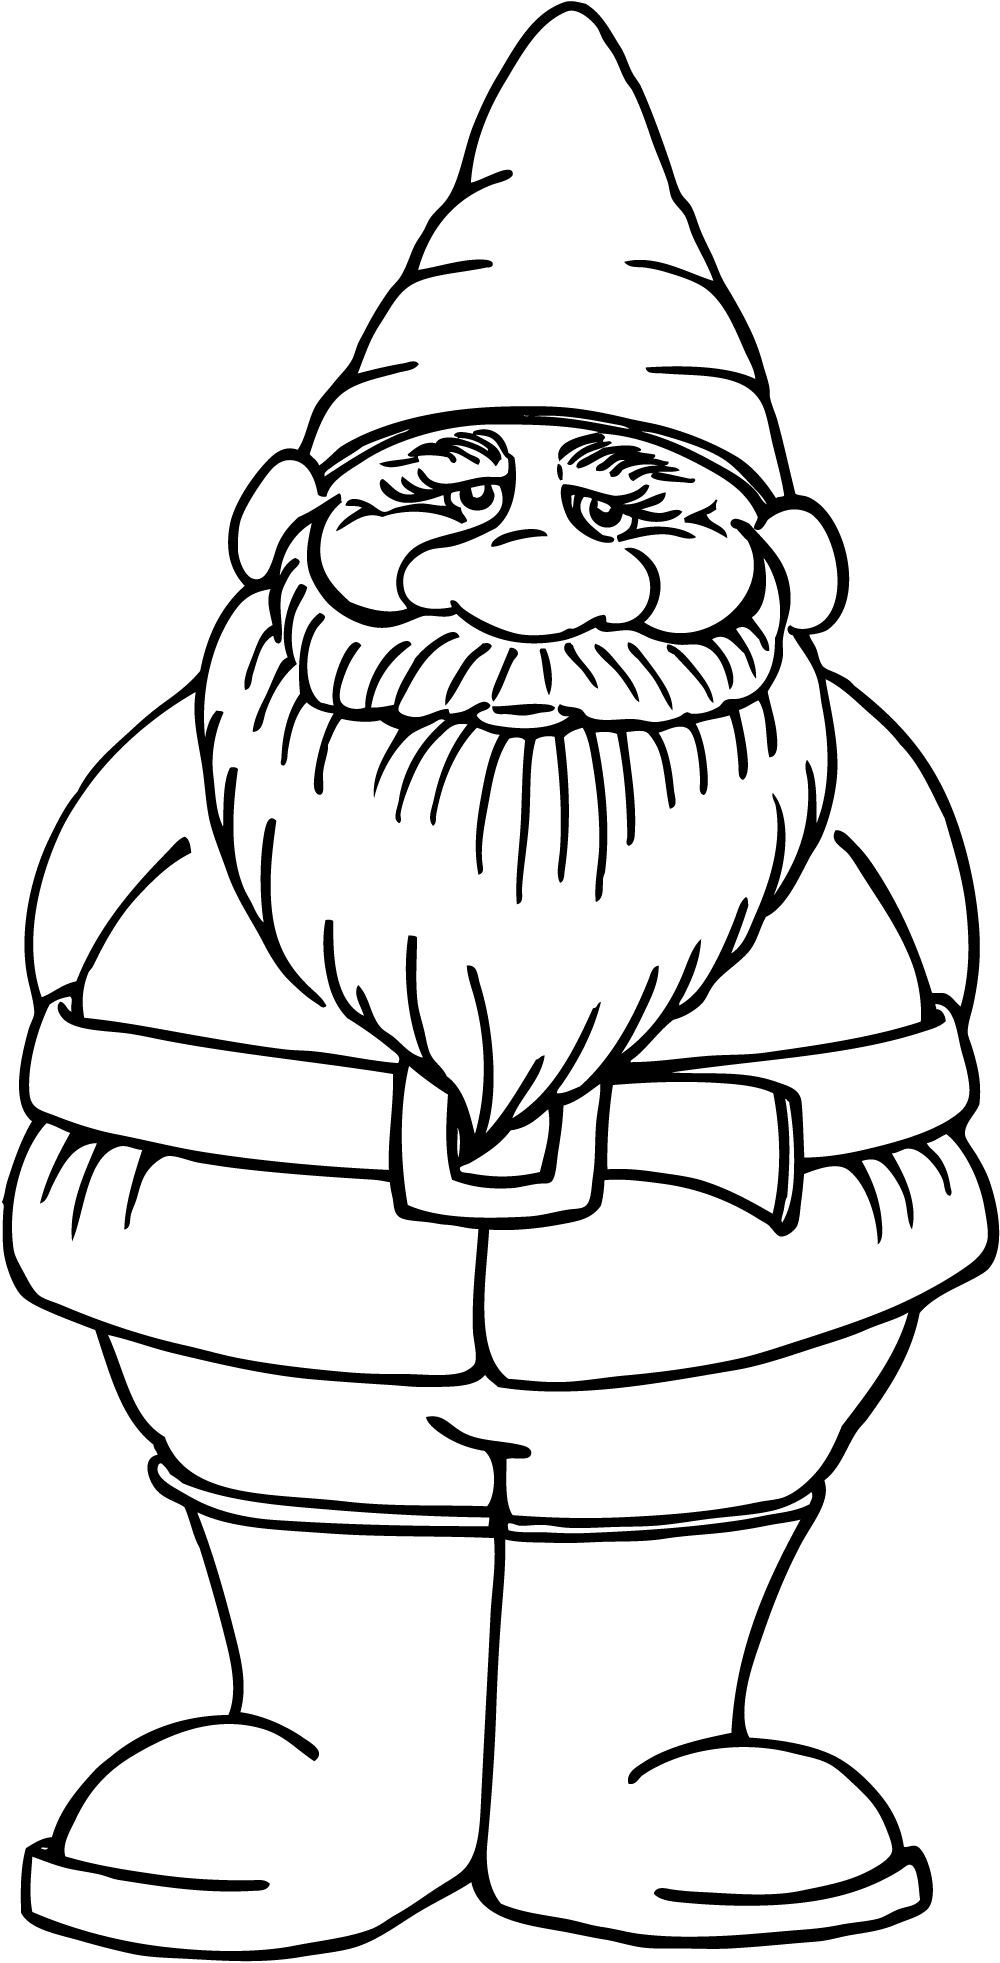 Gnome Coloring Pages Printable at GetDrawings Free download